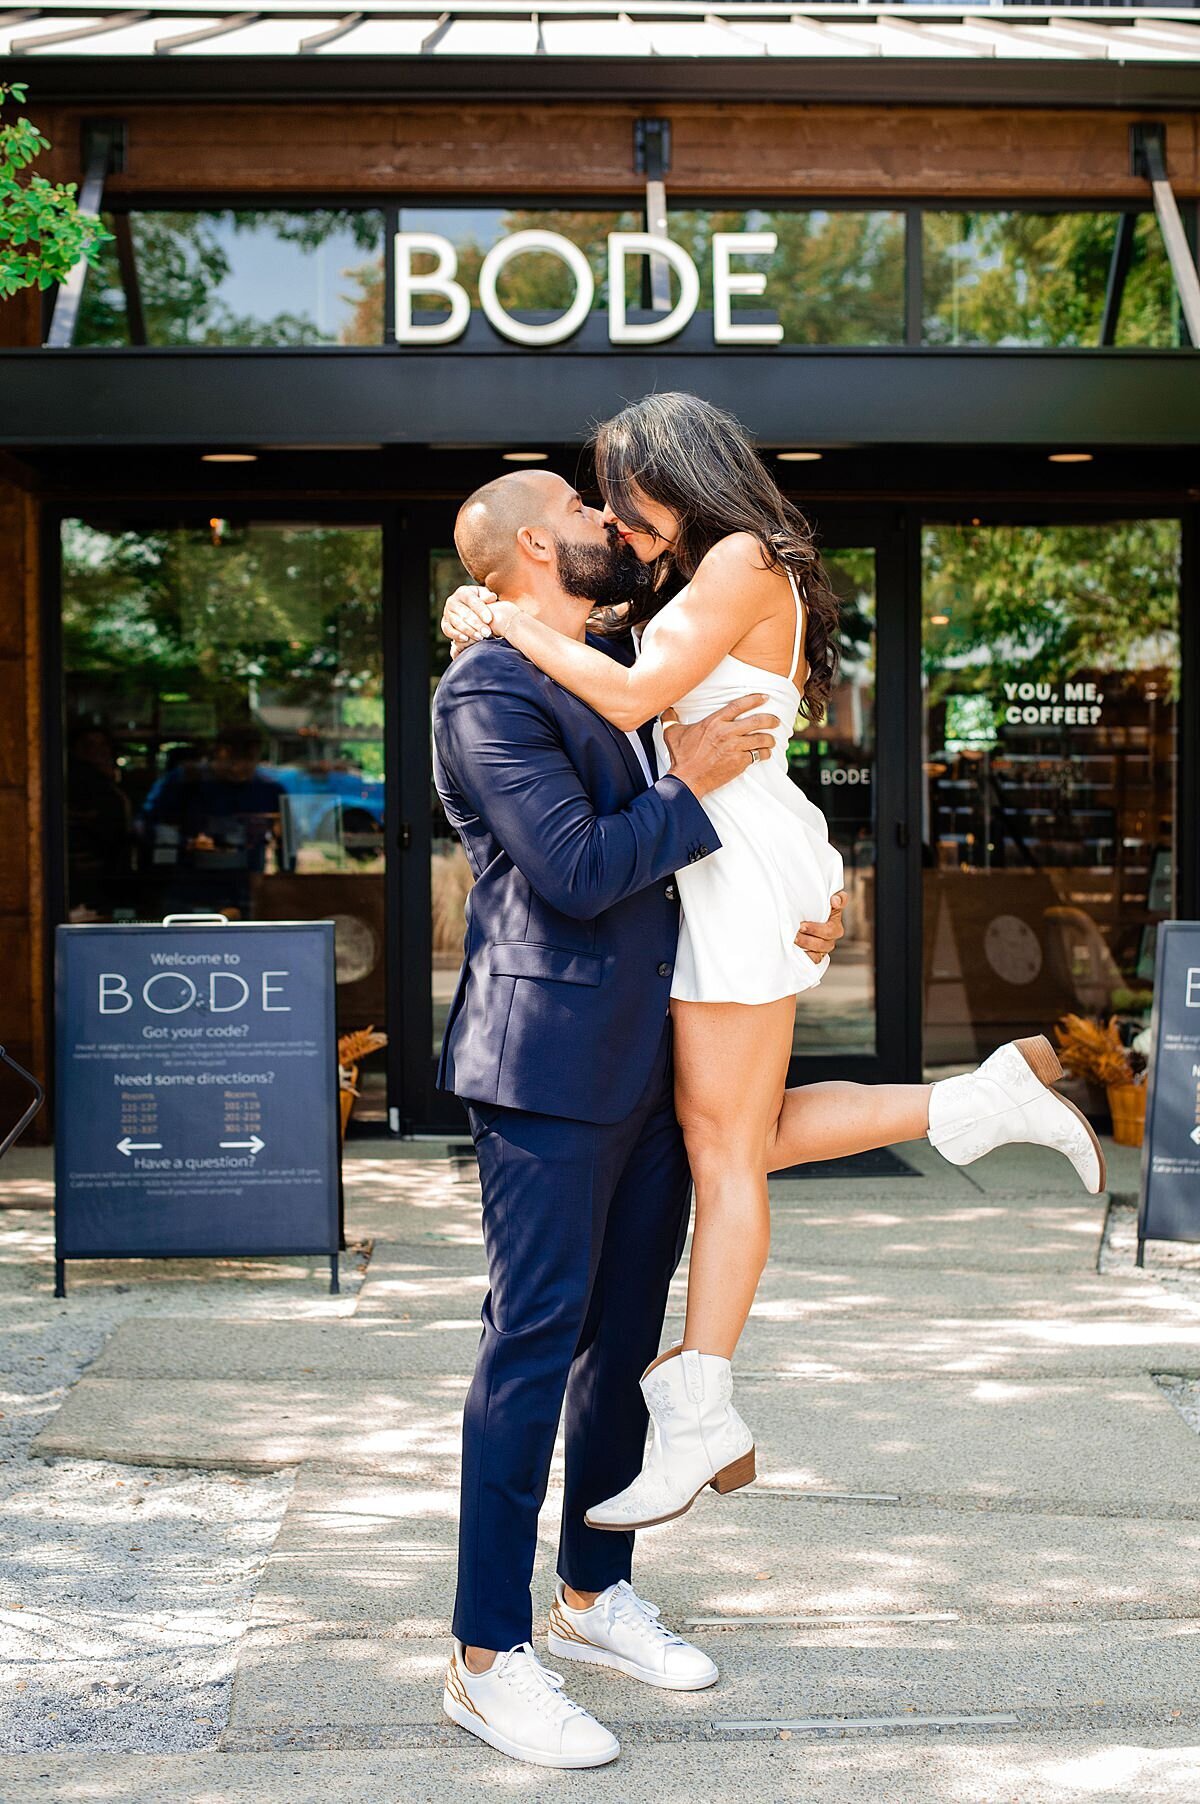 The groom, wearing a slim fit dark blue suit and white sneakers lifts up the bride as he kisses her in front of Bode Nashville. The bride is wearing a mini dress with white booties. She has her leg kicked up in the air as she kisses the groom.